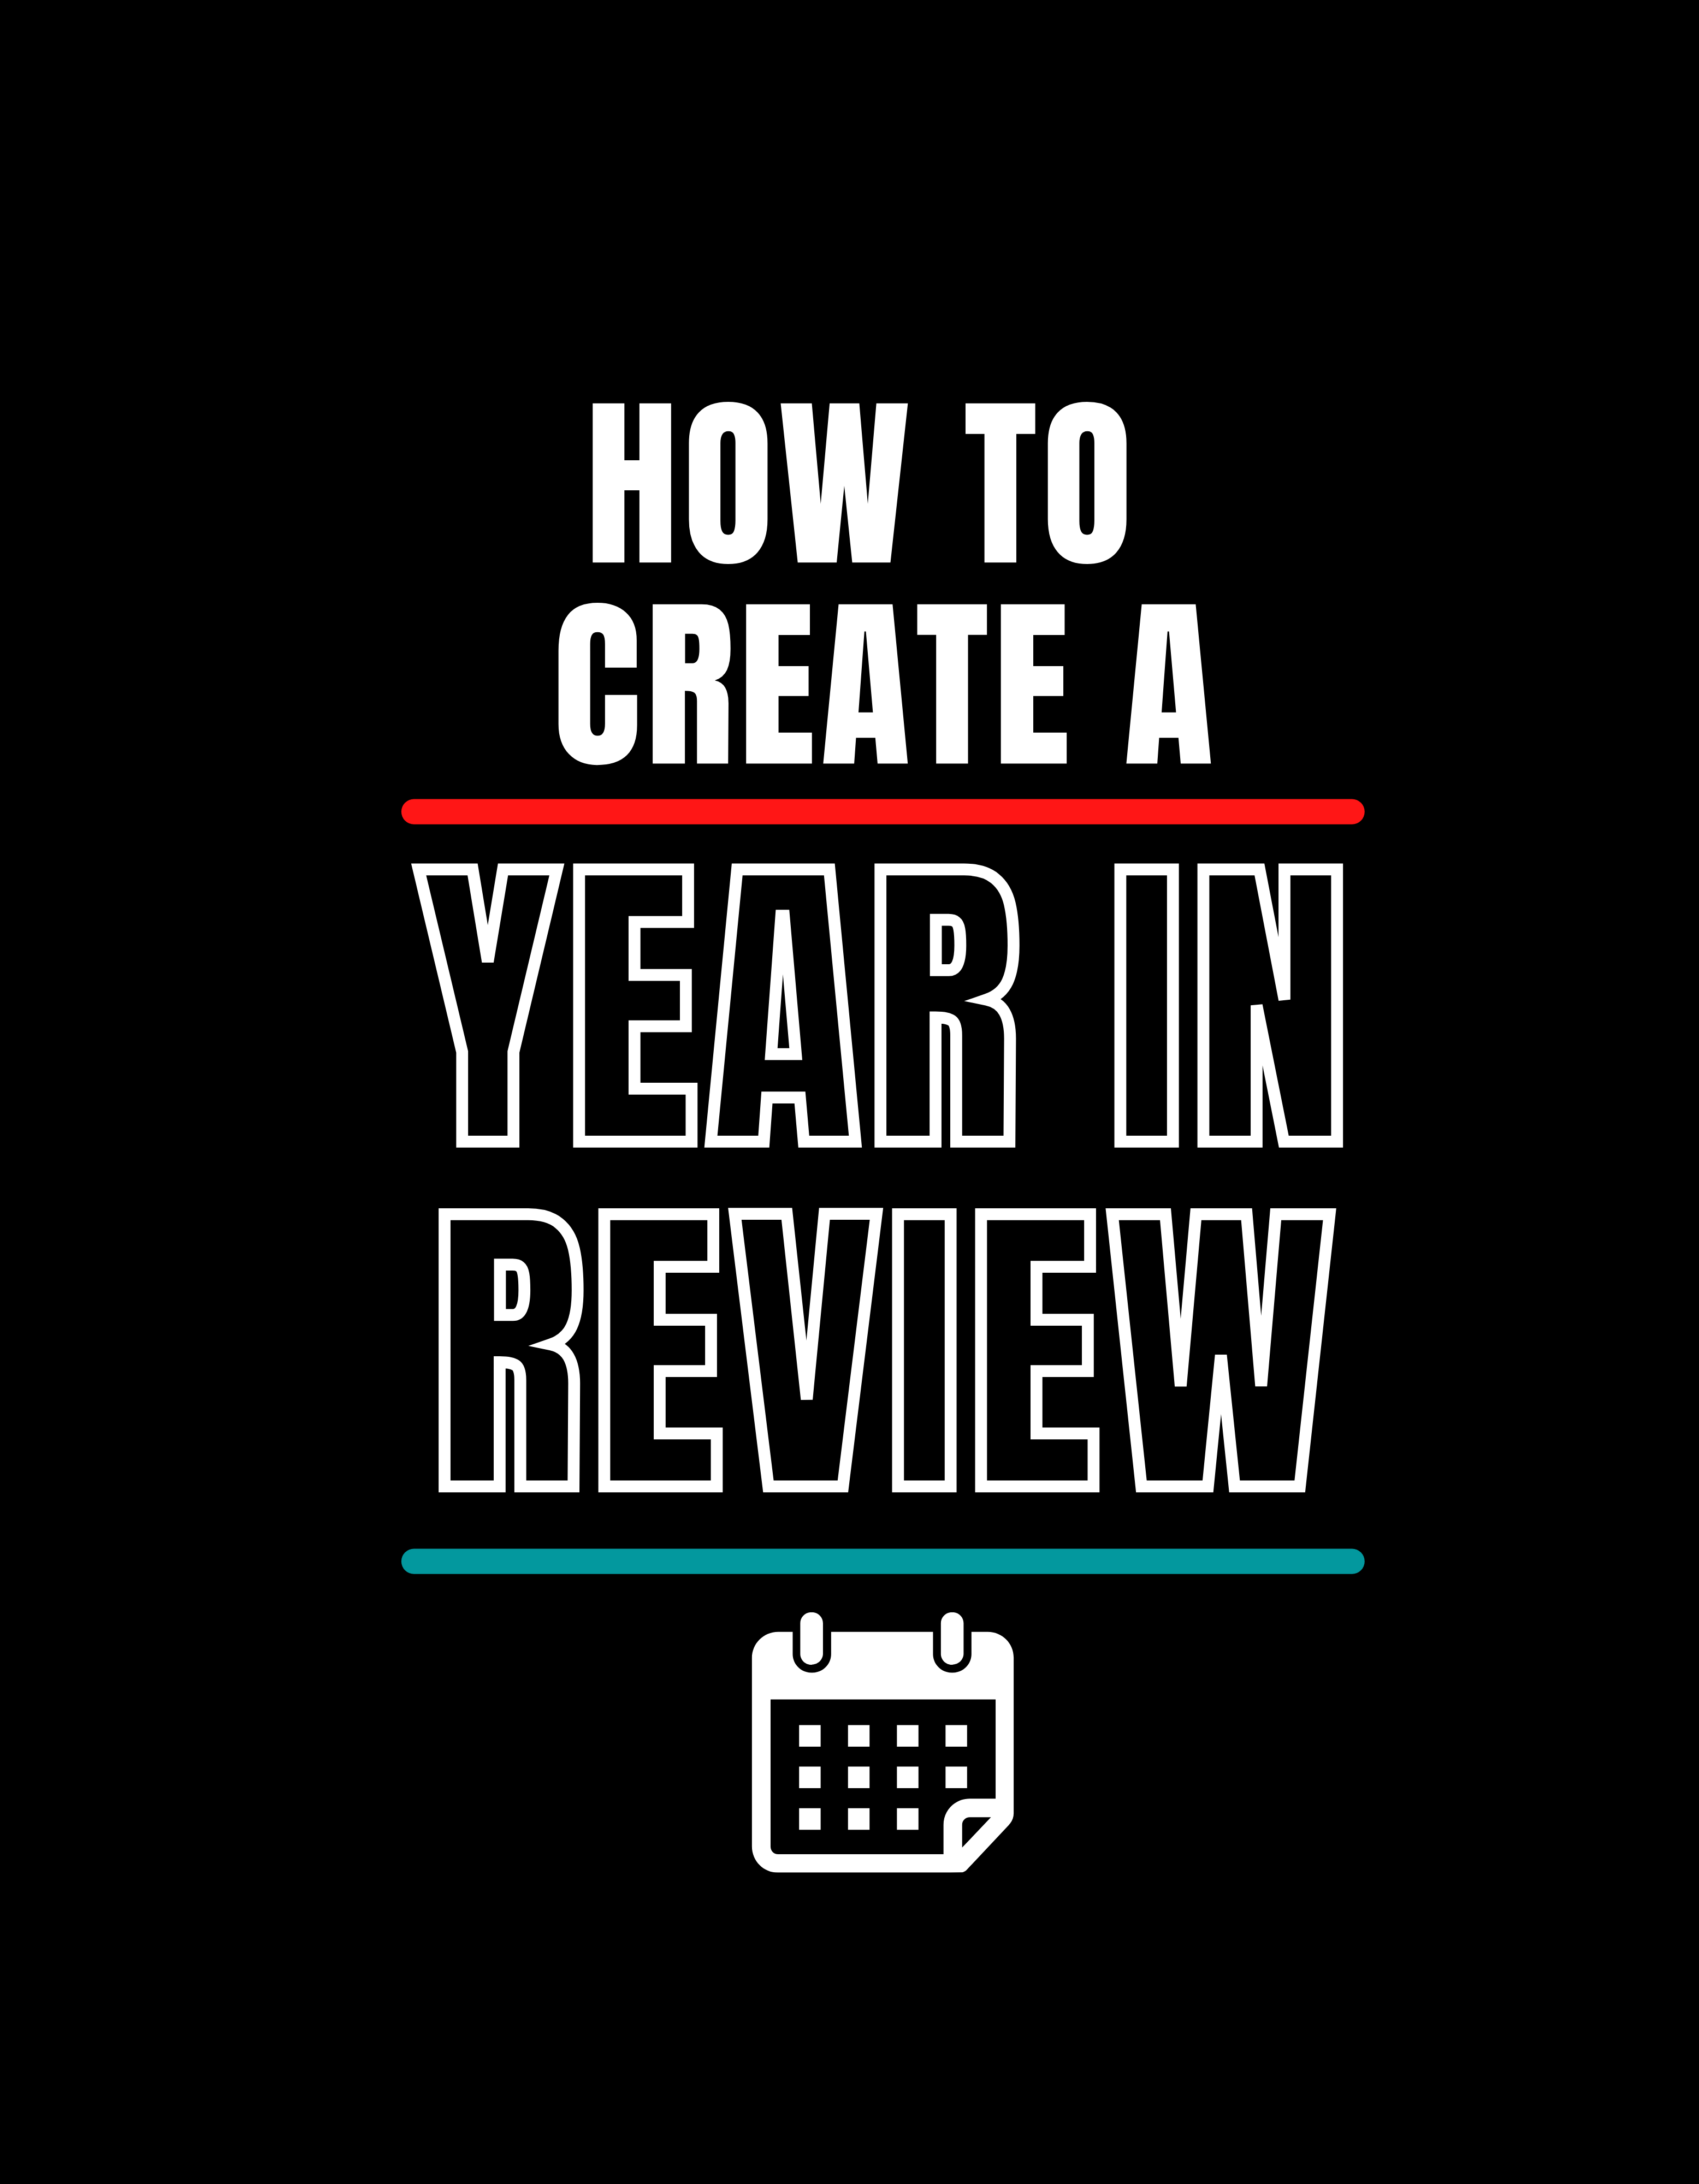 how-to-create-a-year-in-review-issuu